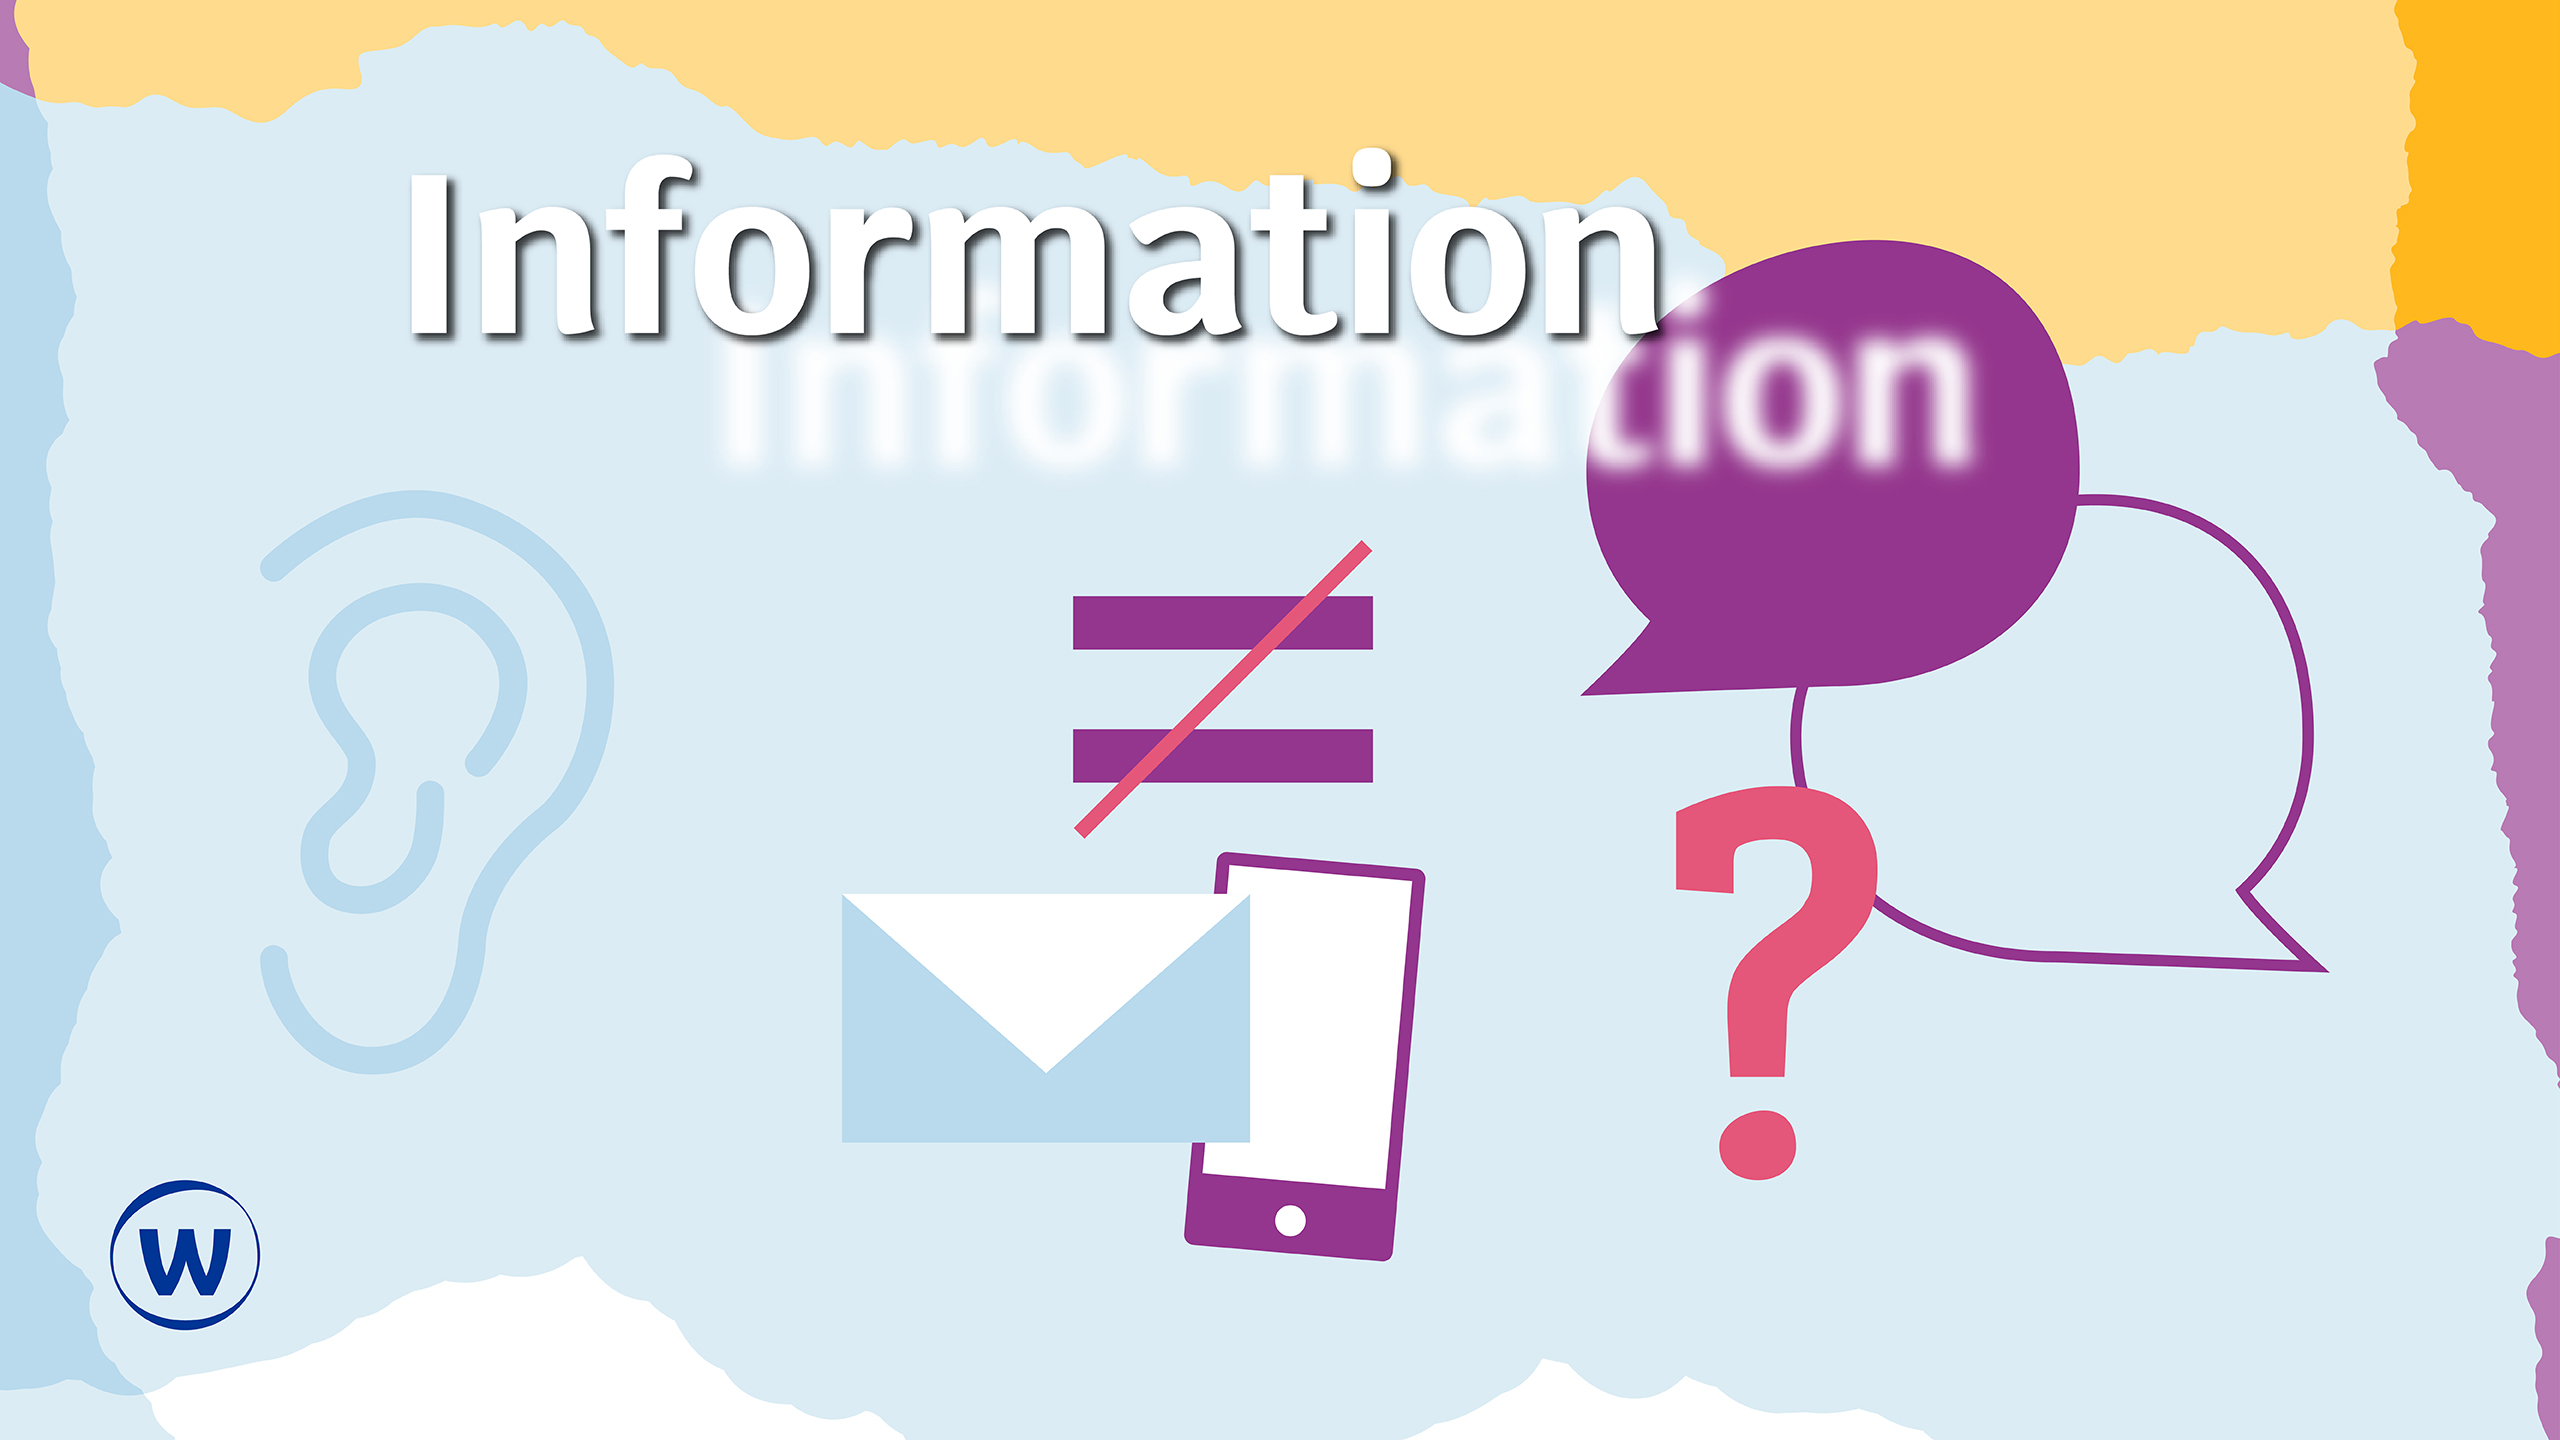 Graphics associated with information inequality, including an envelope, mobile phone, an ear, speech bubbles